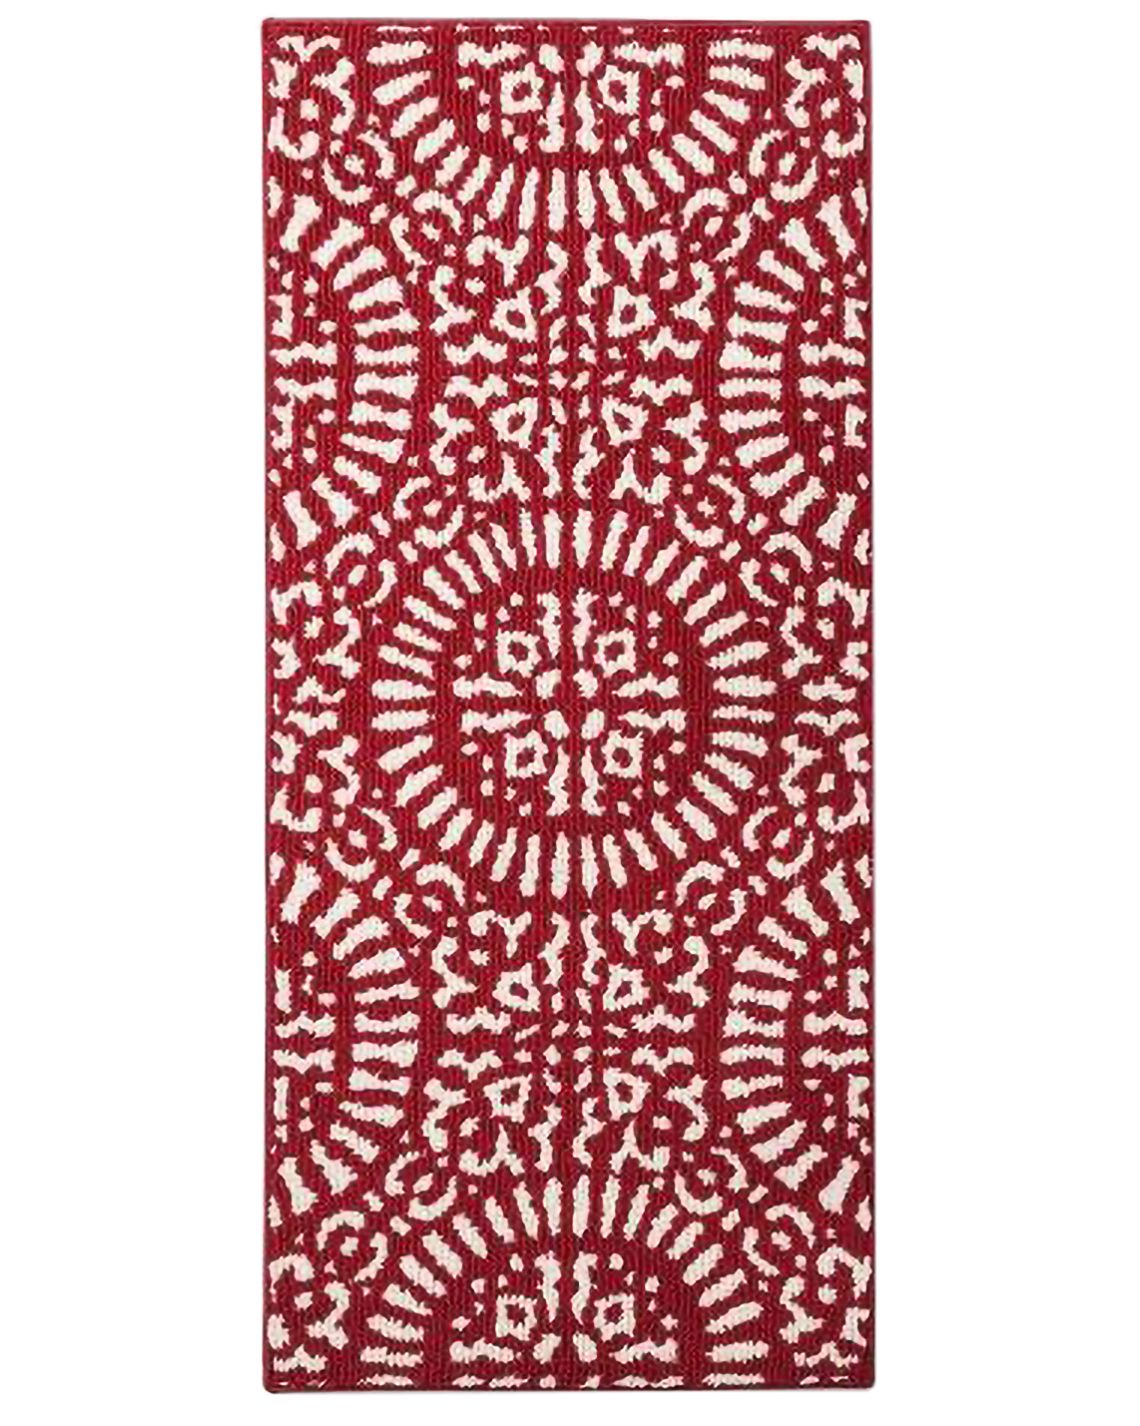 Soft Foam Area Rugs Red and White Daisies Washable Non Slip Kitchen Rugs Bath Rug for Home Decor Indoor/Outdoor 31x20in 